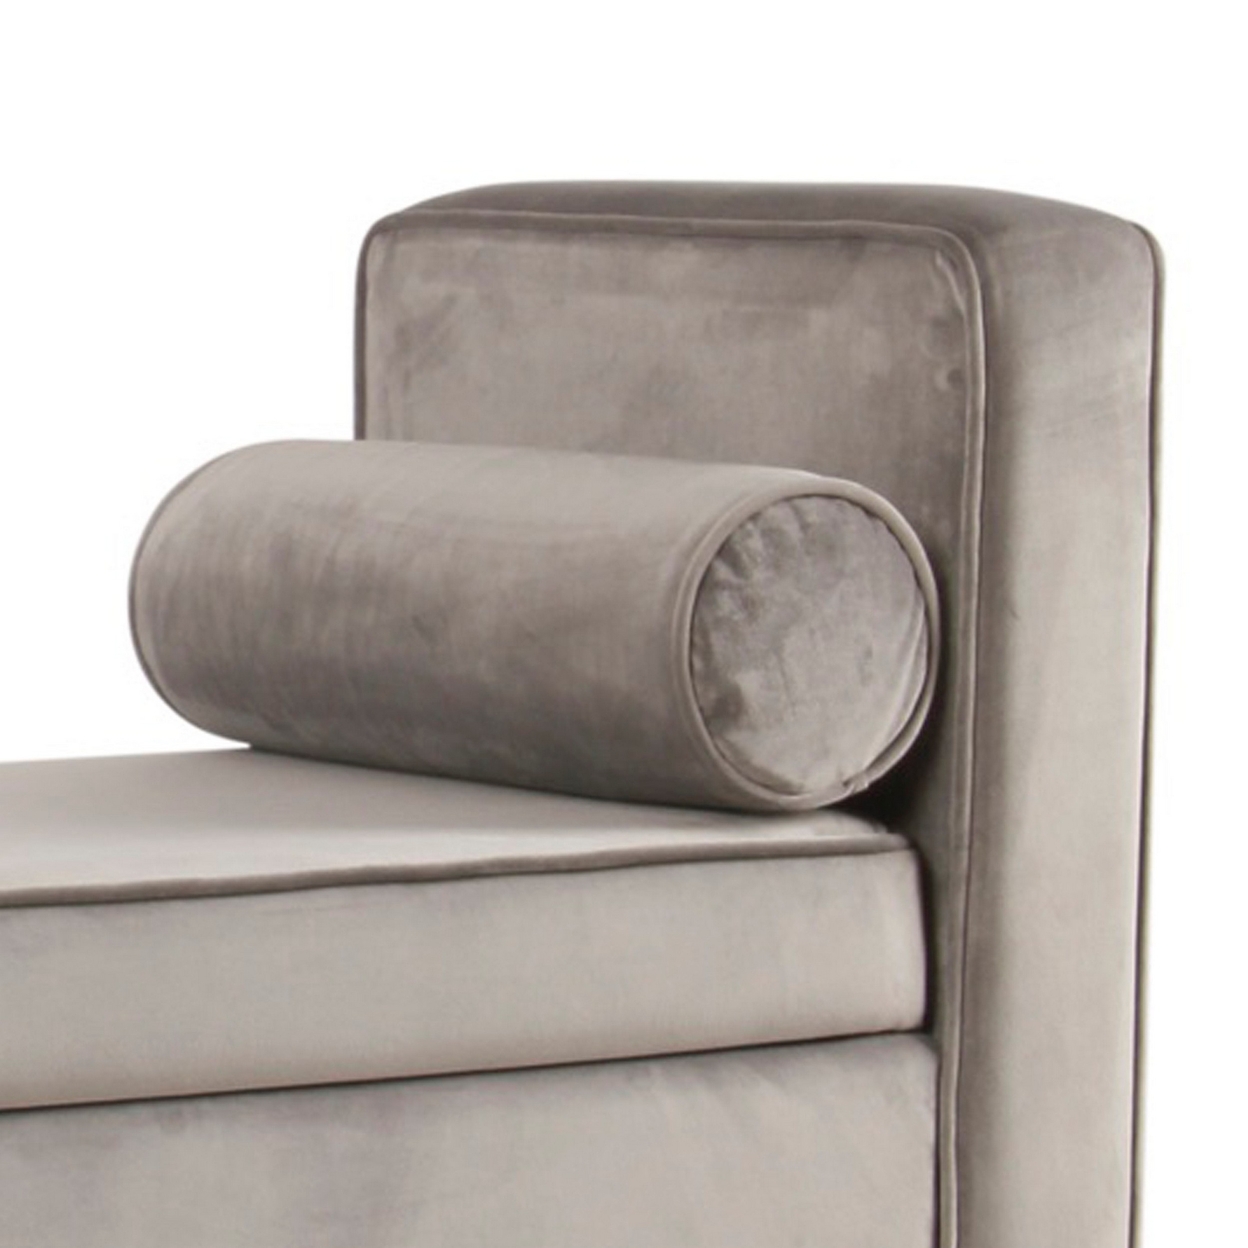 Velvet Upholstered Wooden Bench With Lift Top Storage And Two Bolster Pillows, Gray- Saltoro Sherpi